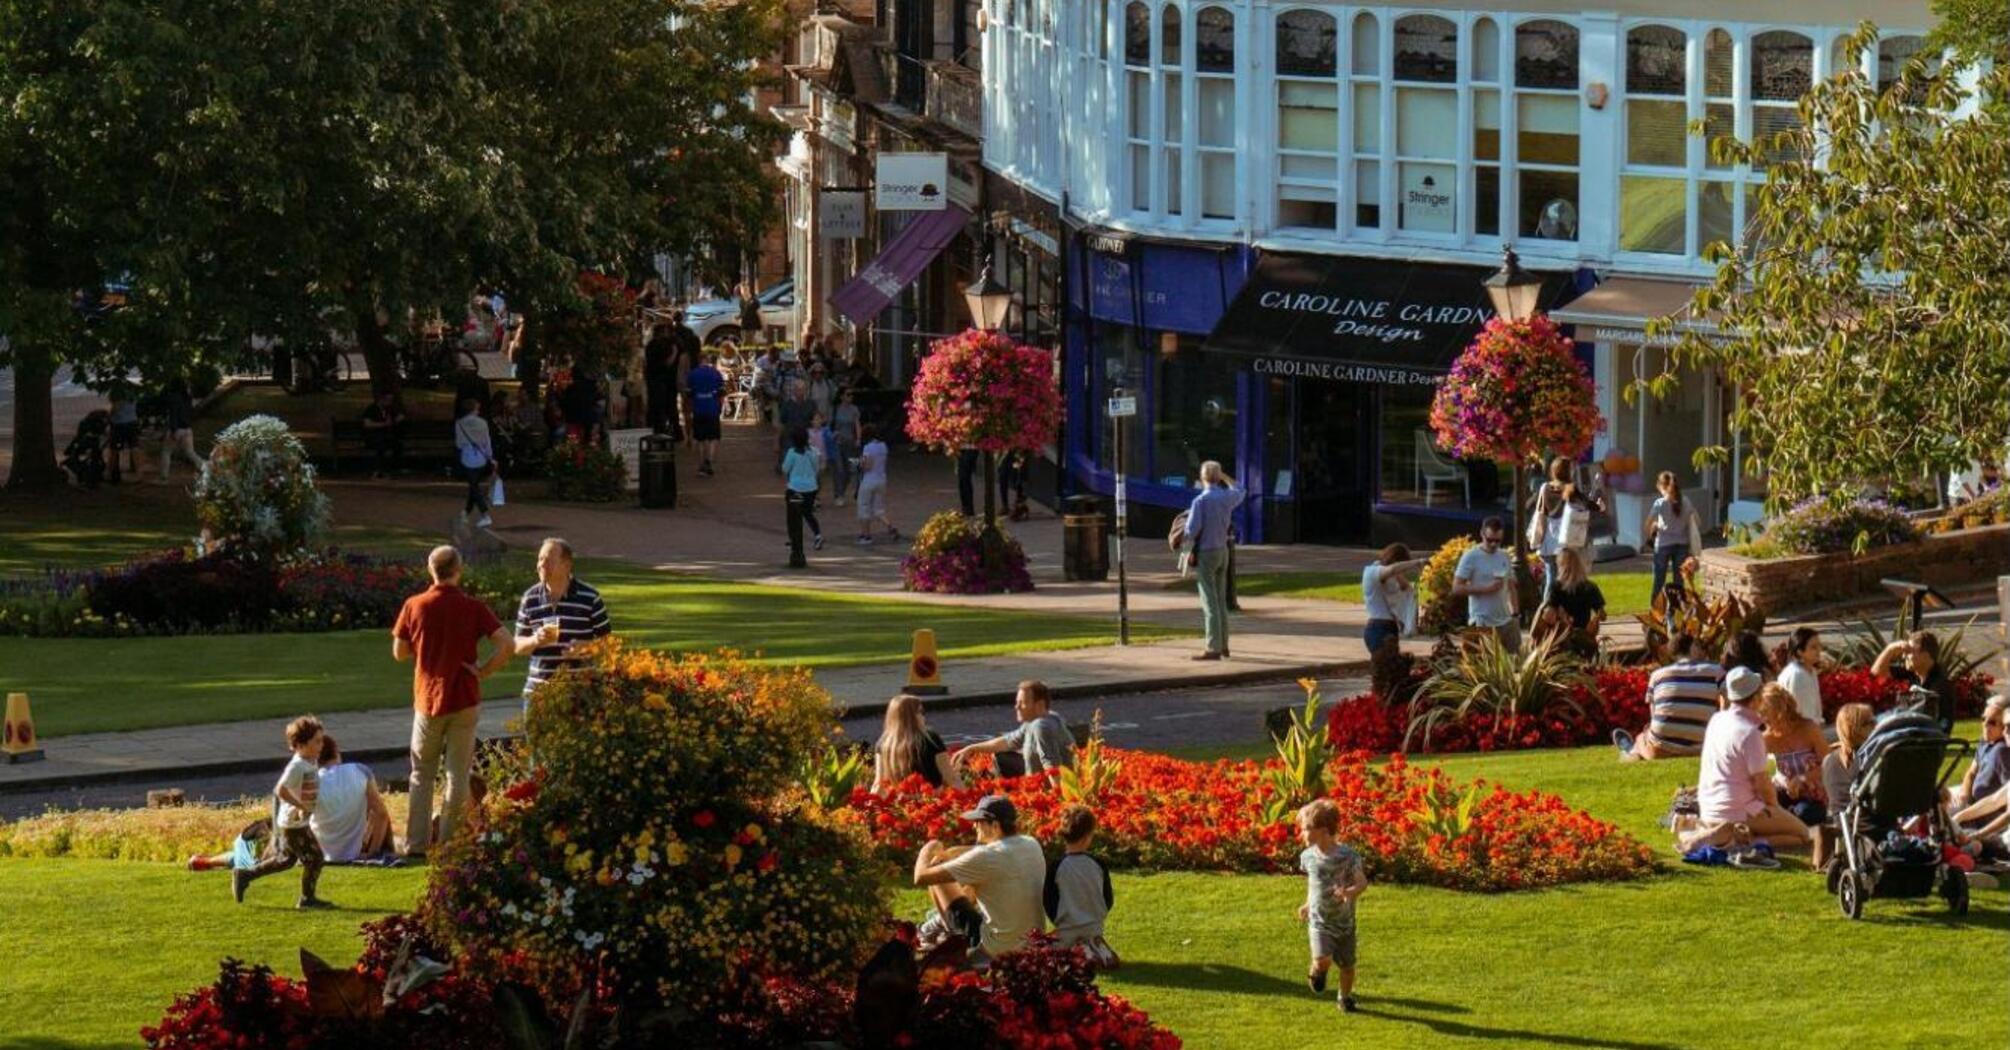 People relaxing in a sunny park surrounded by colorful flowers and historic buildings in Harrogate